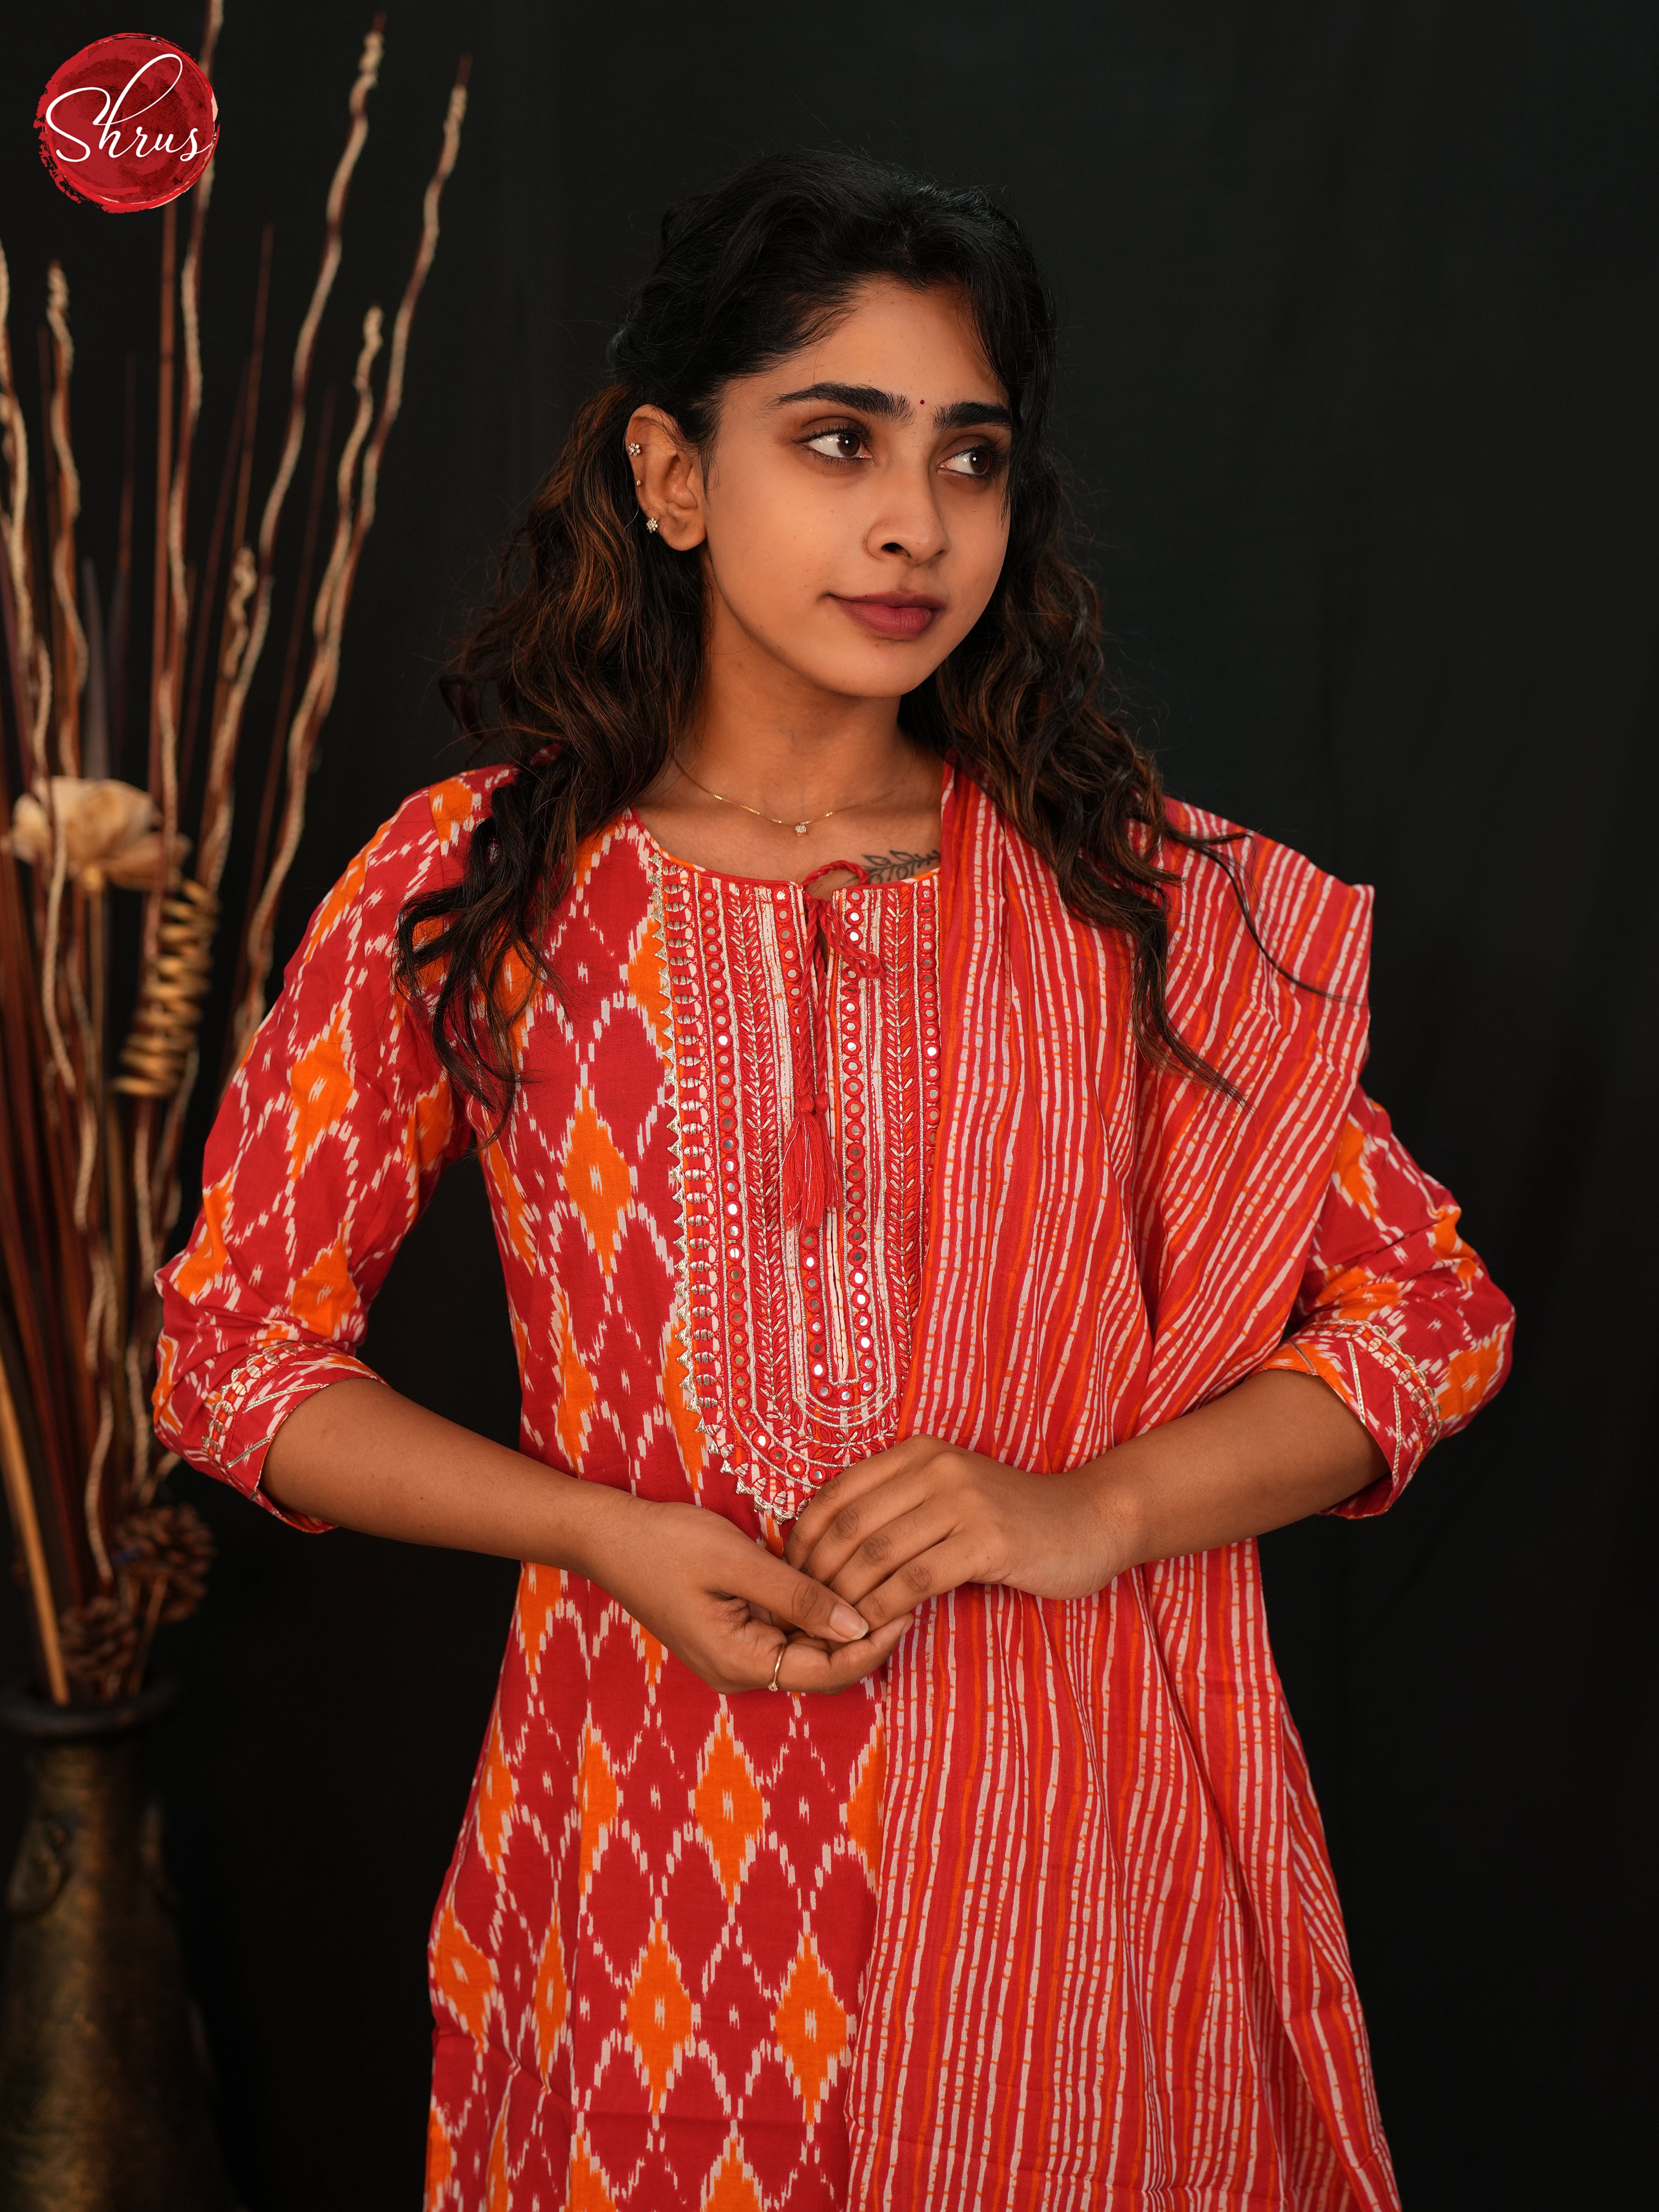 Red & Yellow -Readymade Salwar Suit with floral print - Shop on ShrusEternity.com